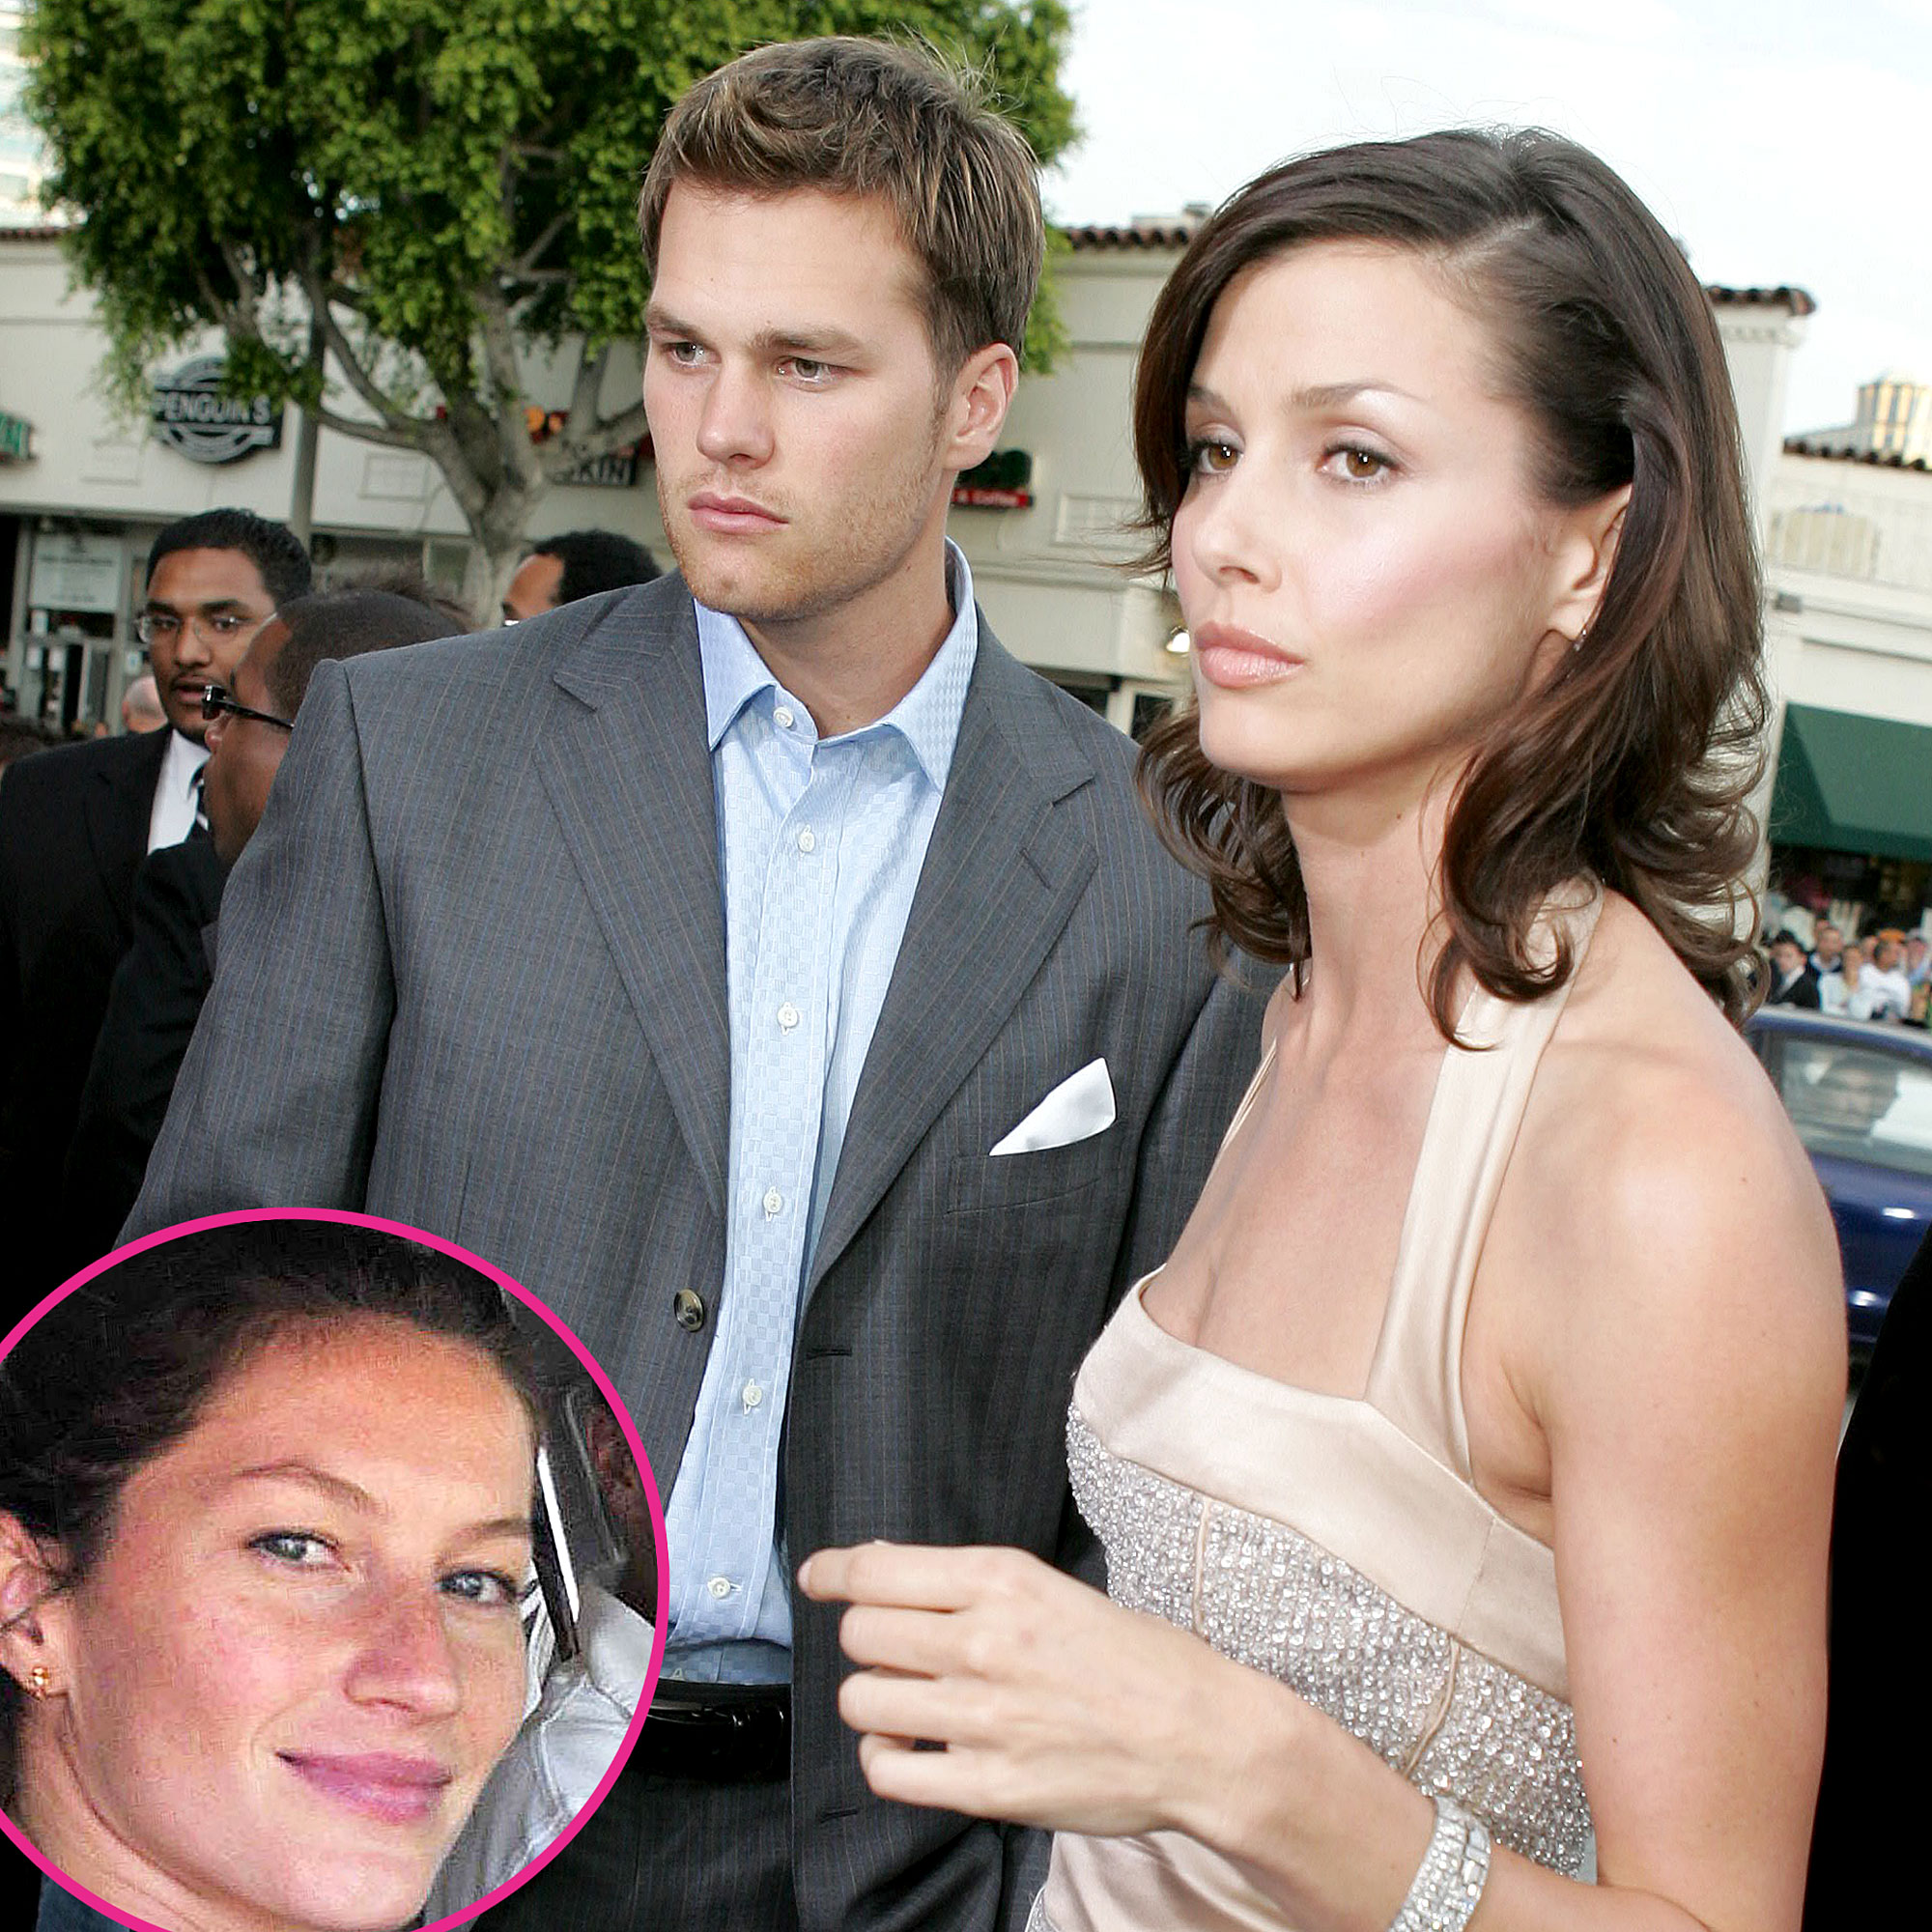 Bridget Moynahan's Quotes About Her Relationship With Ex Tom Brady